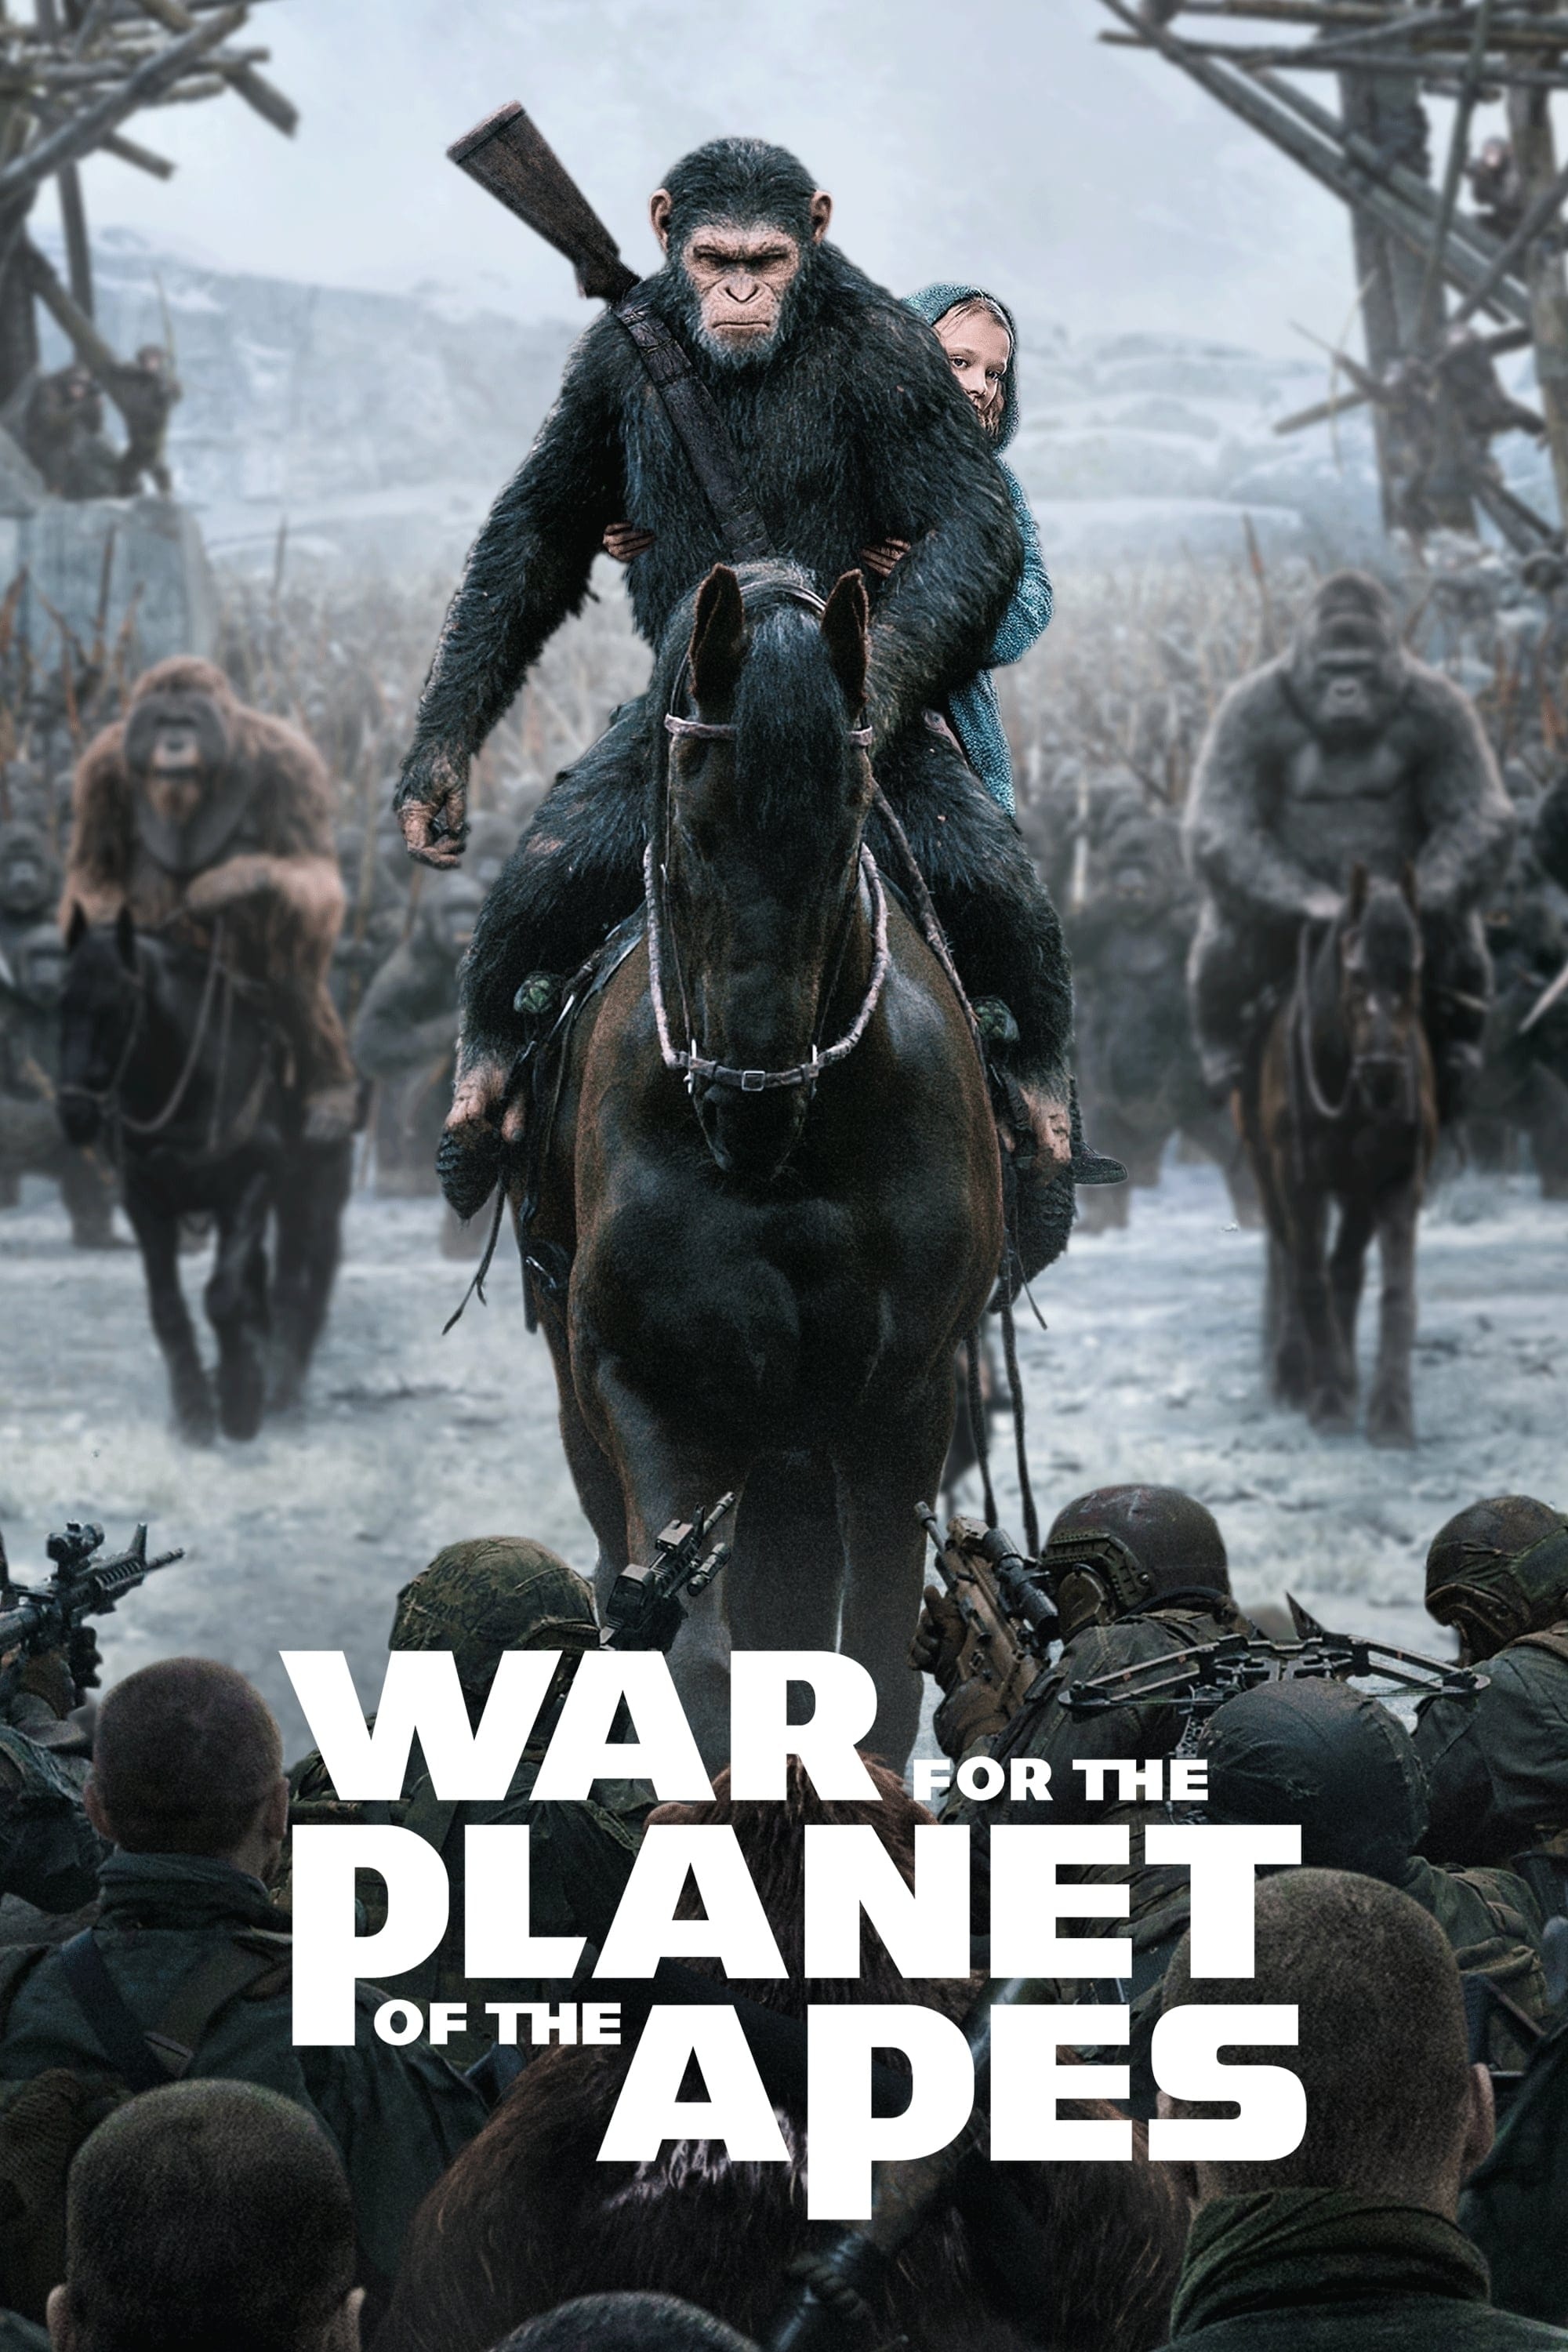 Planet of the Apes, Ape-dominated world, Emotional drama, Action-packed adventure, 2000x3000 HD Handy